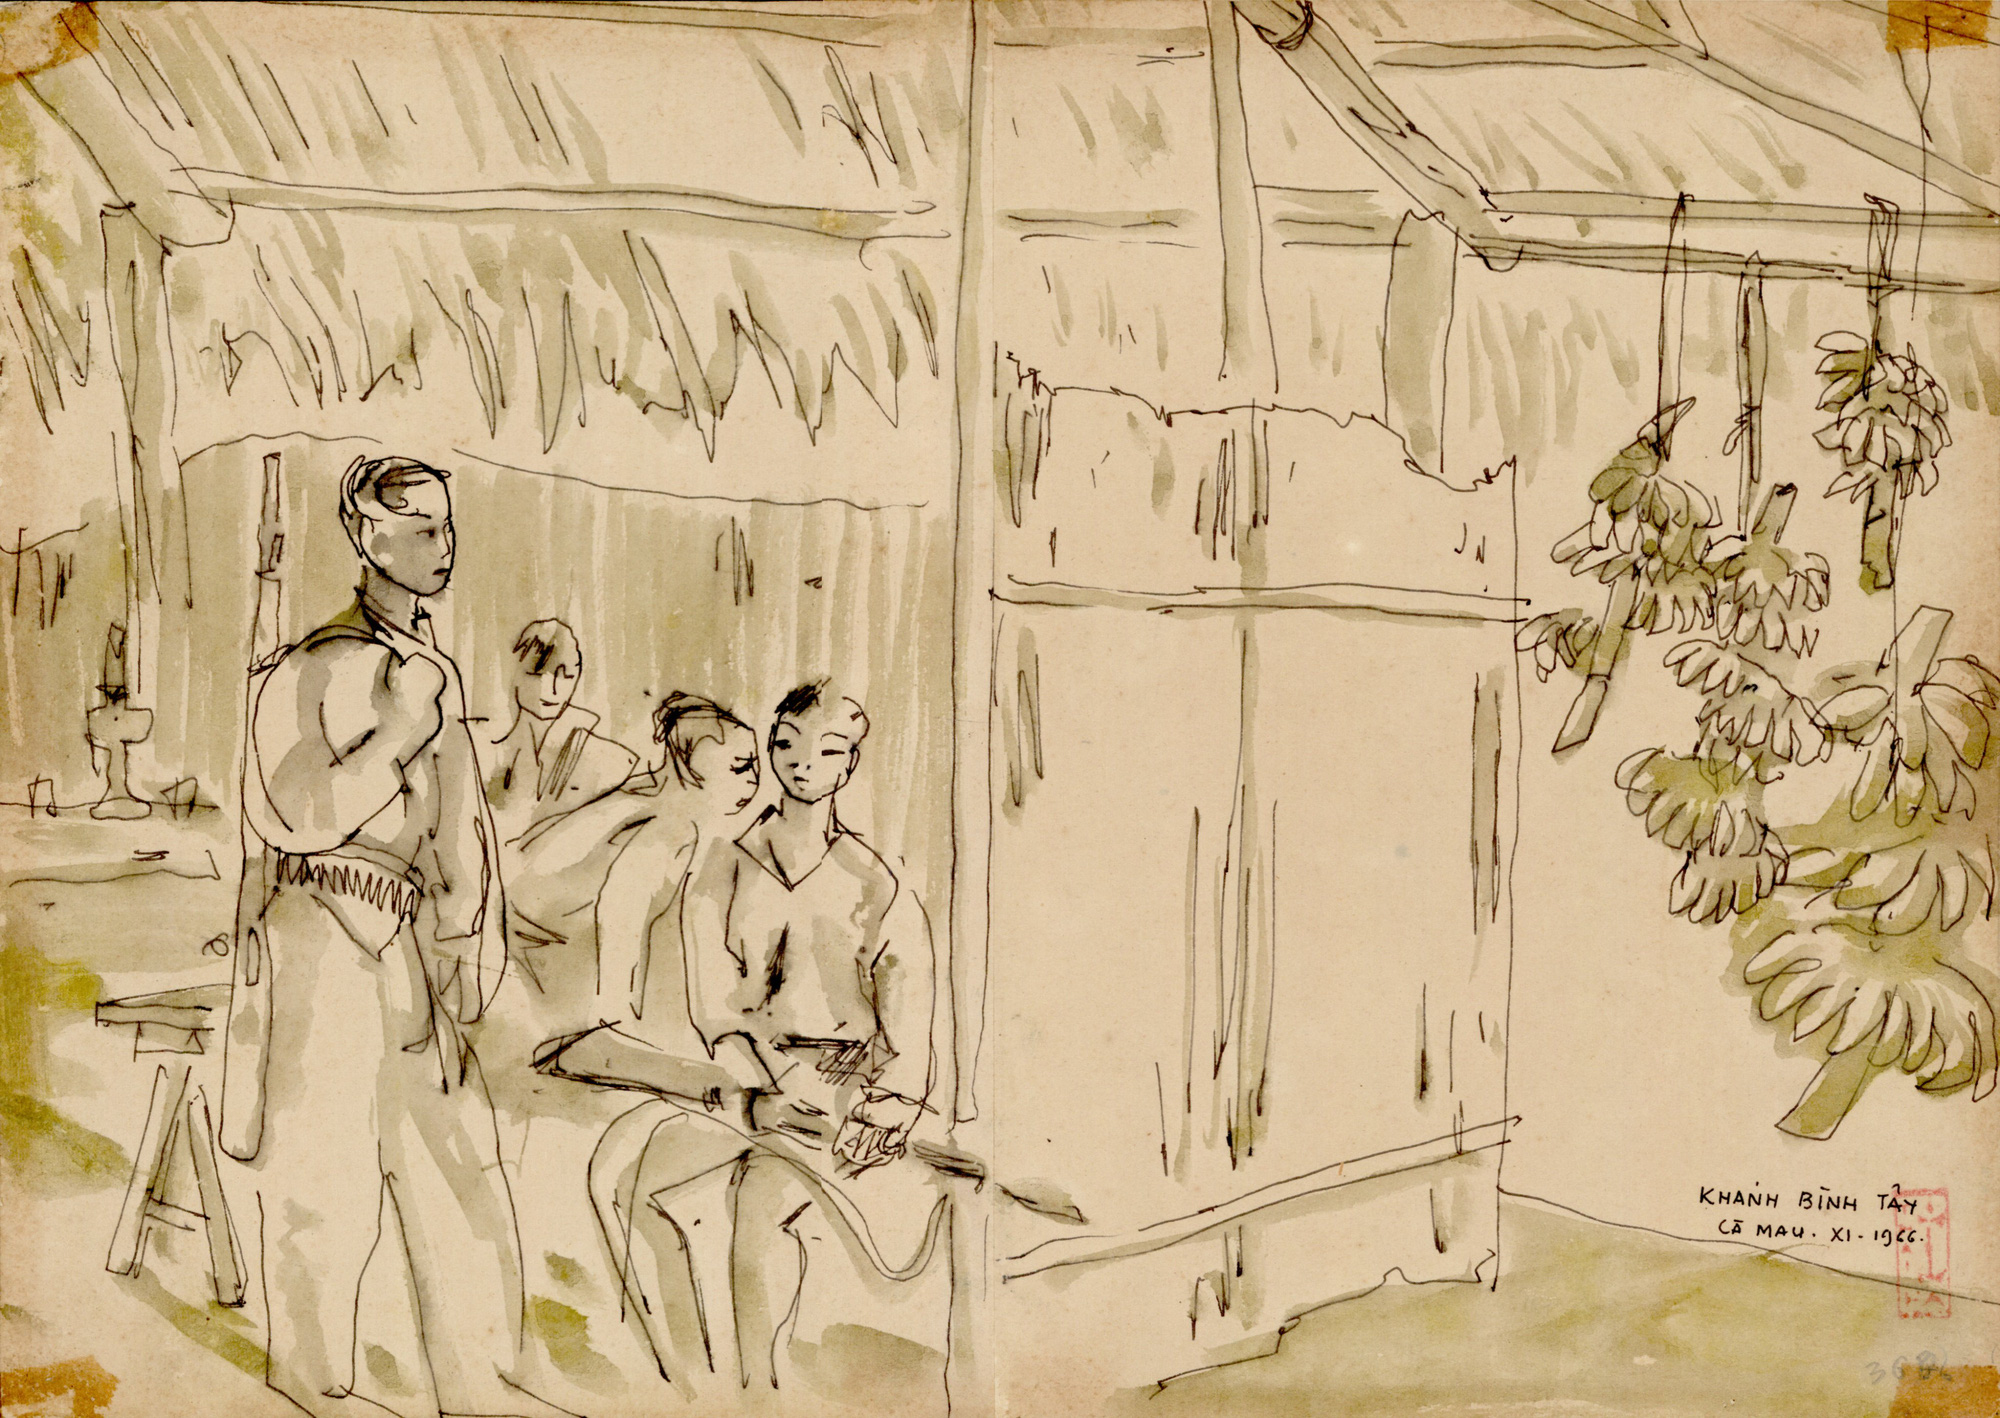 70 sketches depicting realistically and emotionally the southern resistance war - Photo 5.